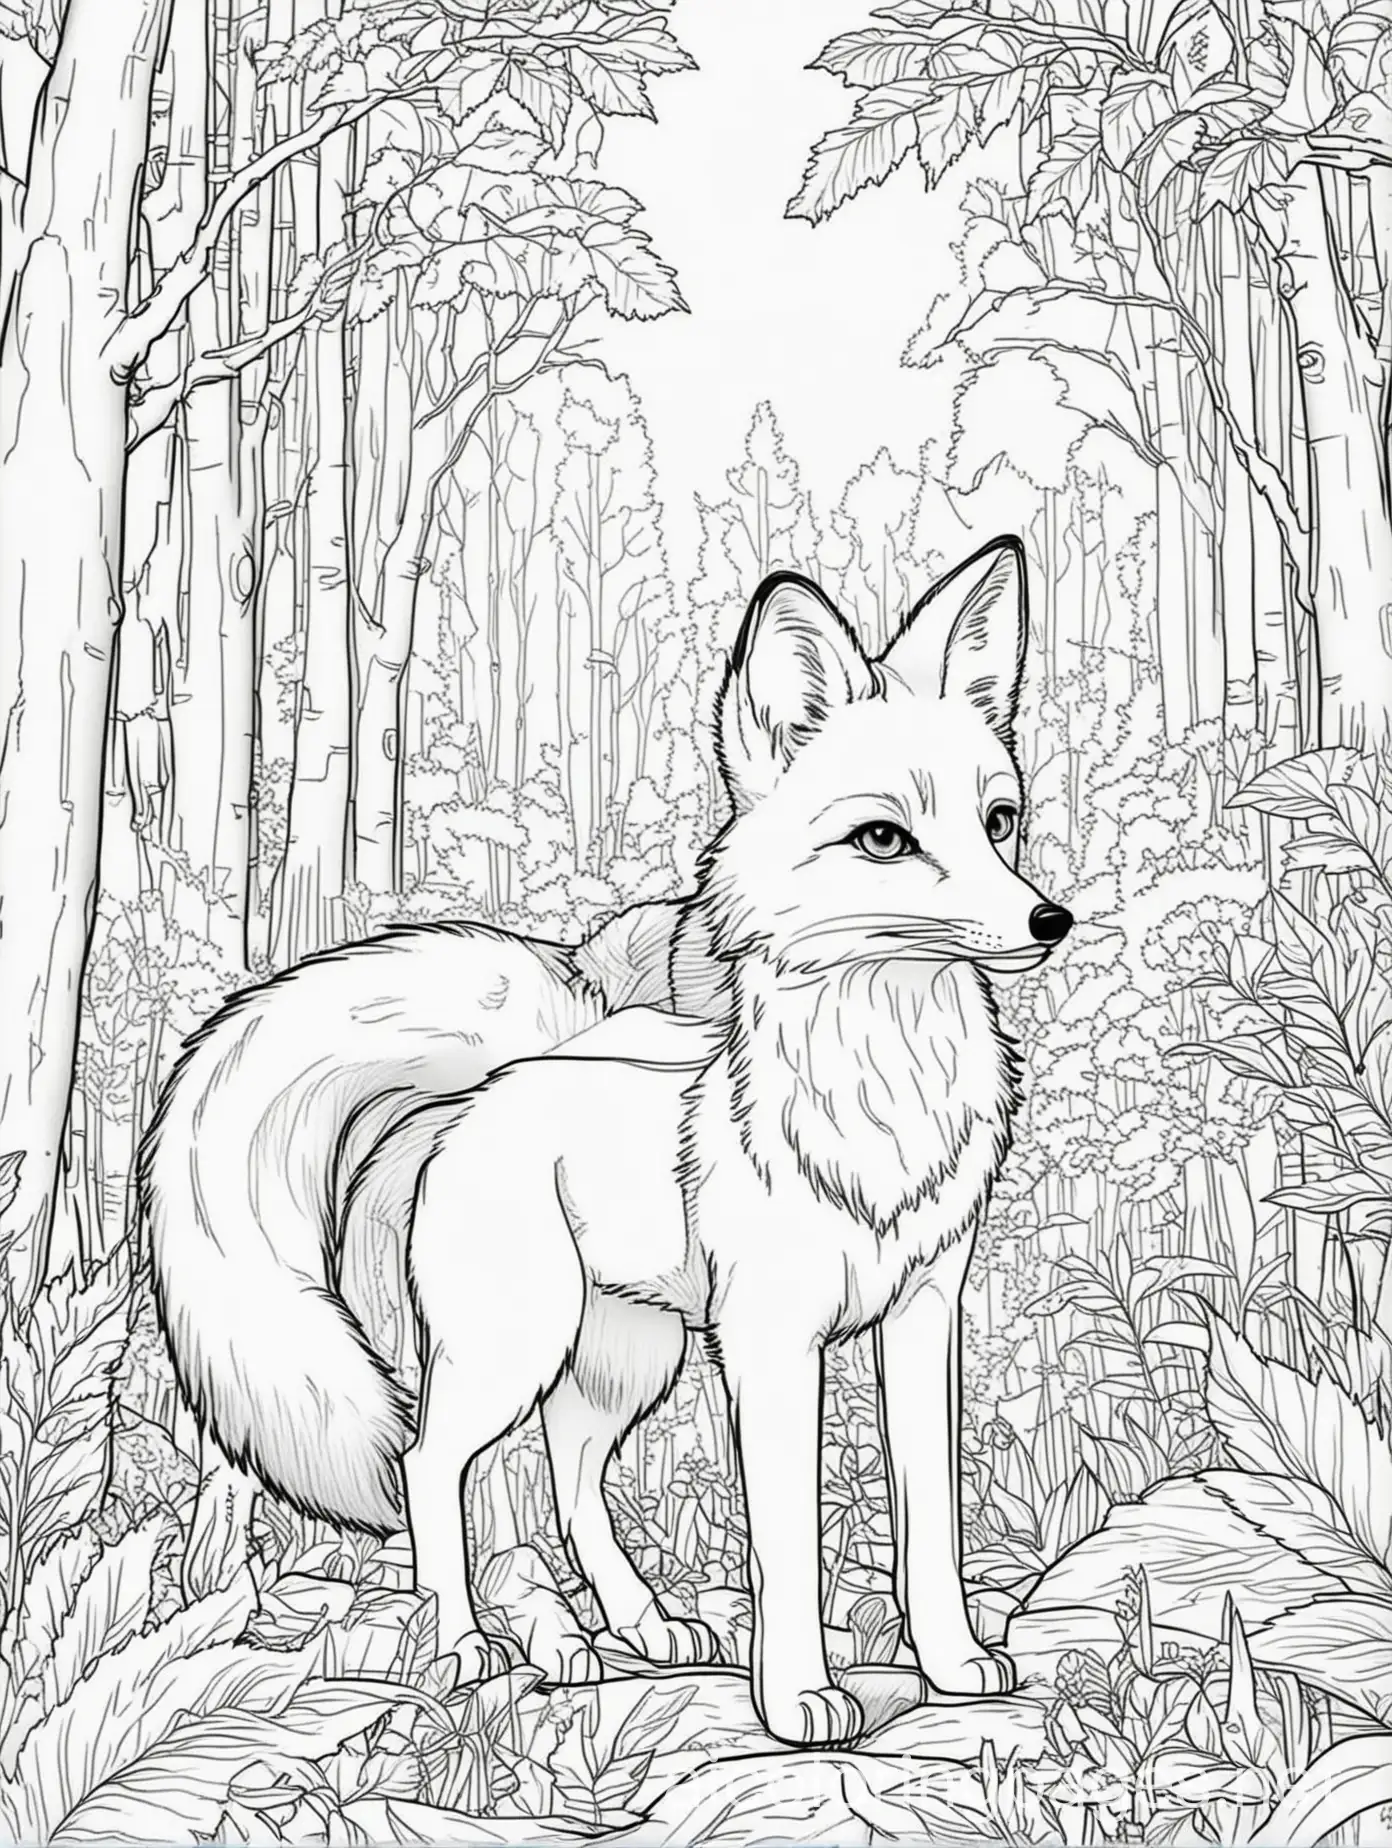 Fox-in-Forest-Coloring-Page-Simple-Black-and-White-Line-Art-for-Kids